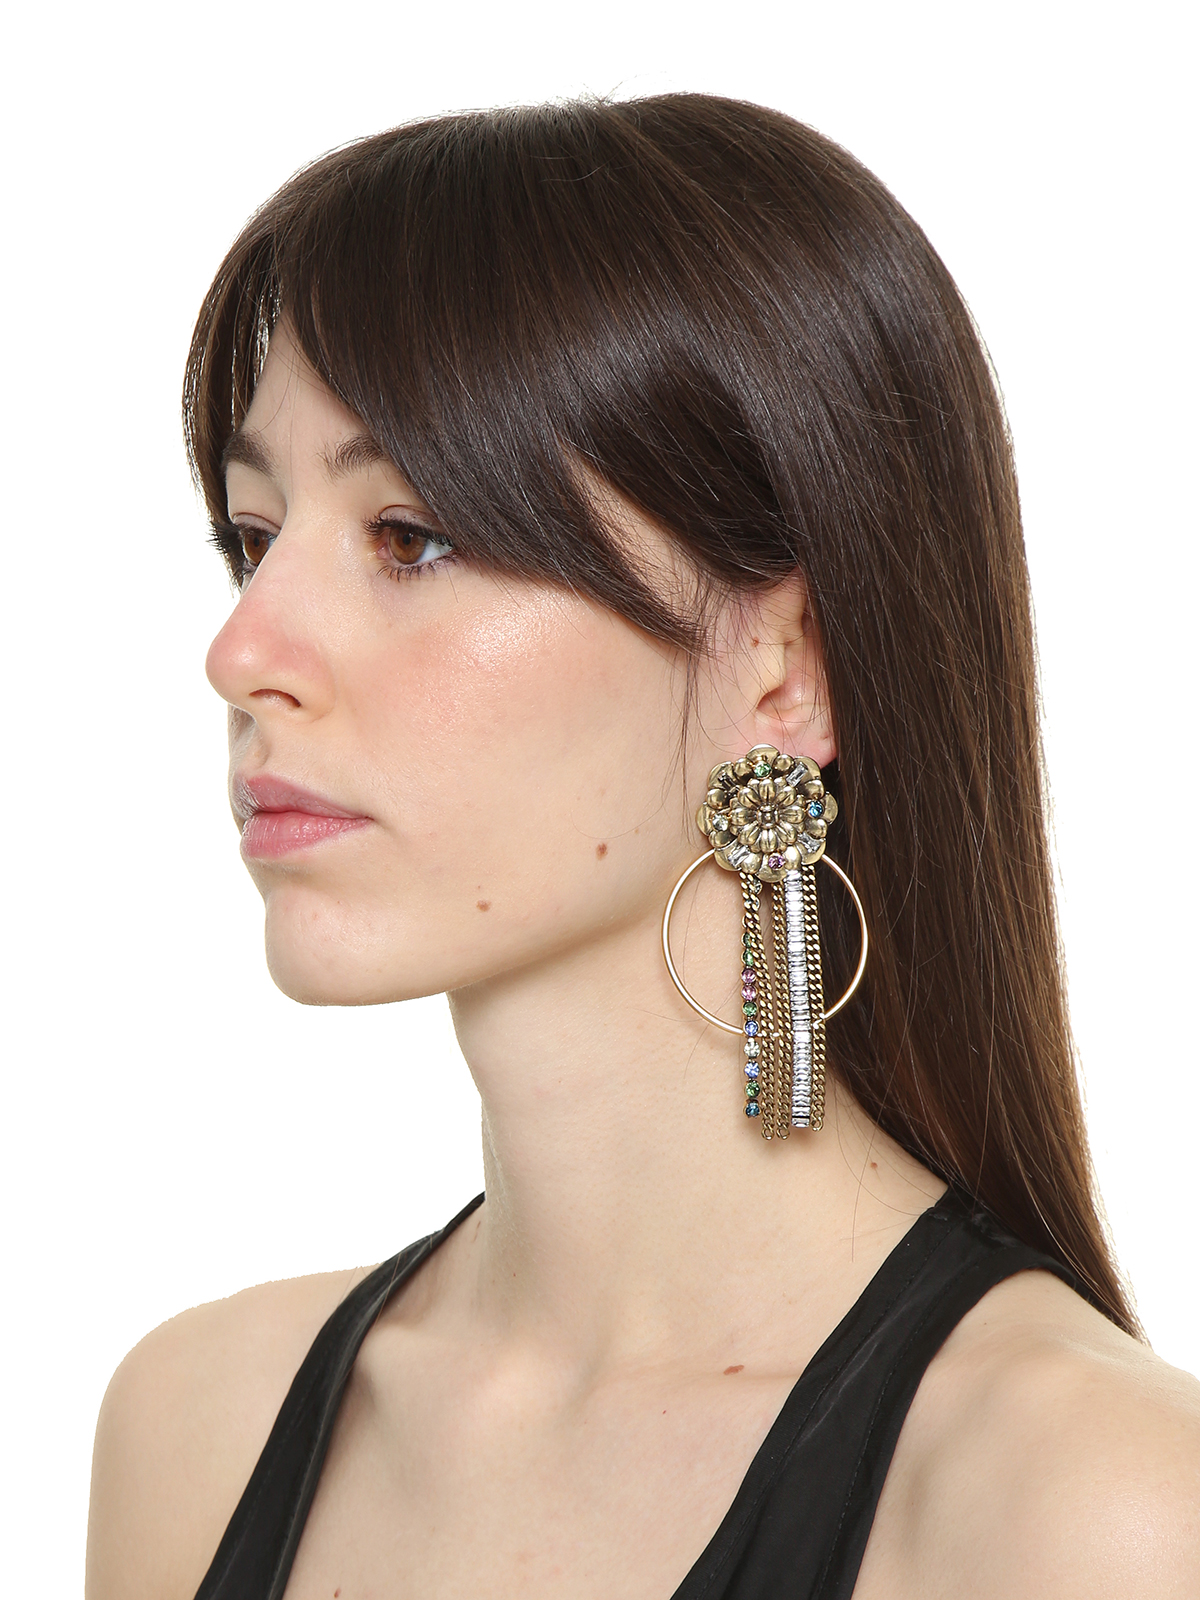 Flower earrings with chain cascade and hoop pendant